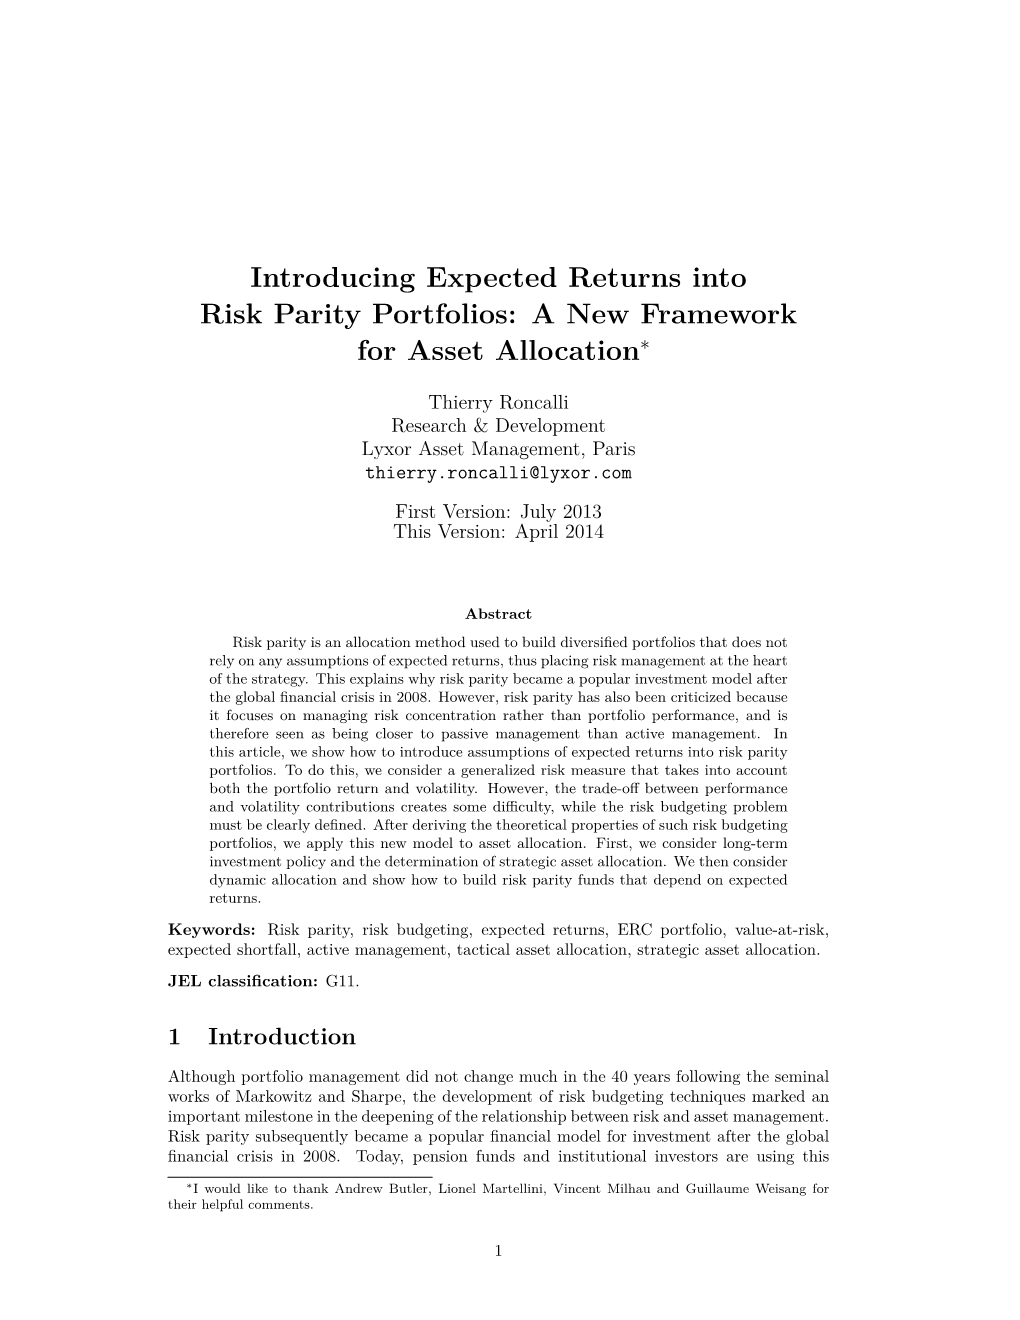 Introducing Expected Returns Into Risk Parity Portfolios: a New Framework for Asset Allocation∗